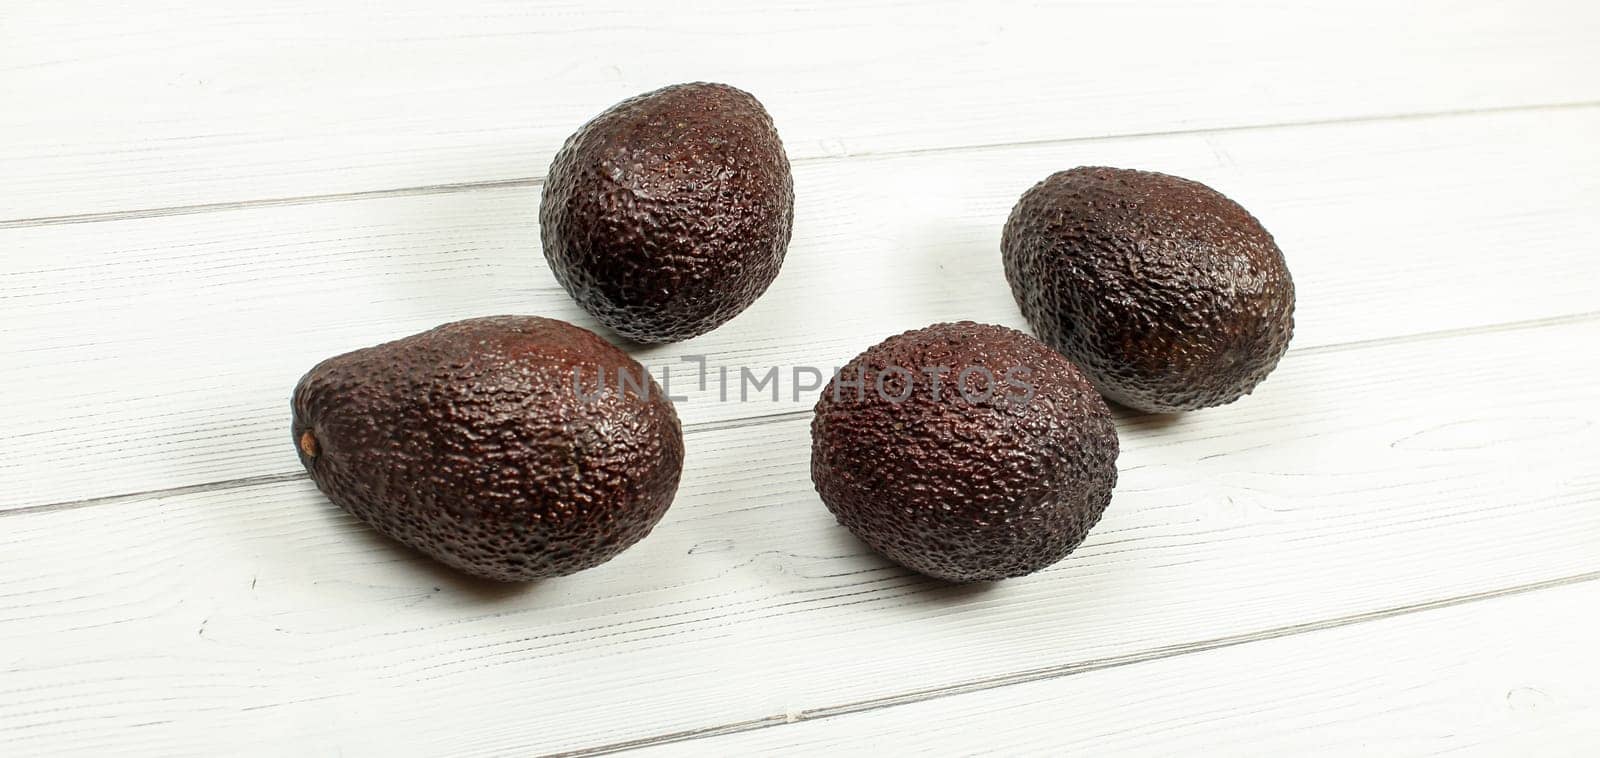 Four brown ripe avocados on white boards.